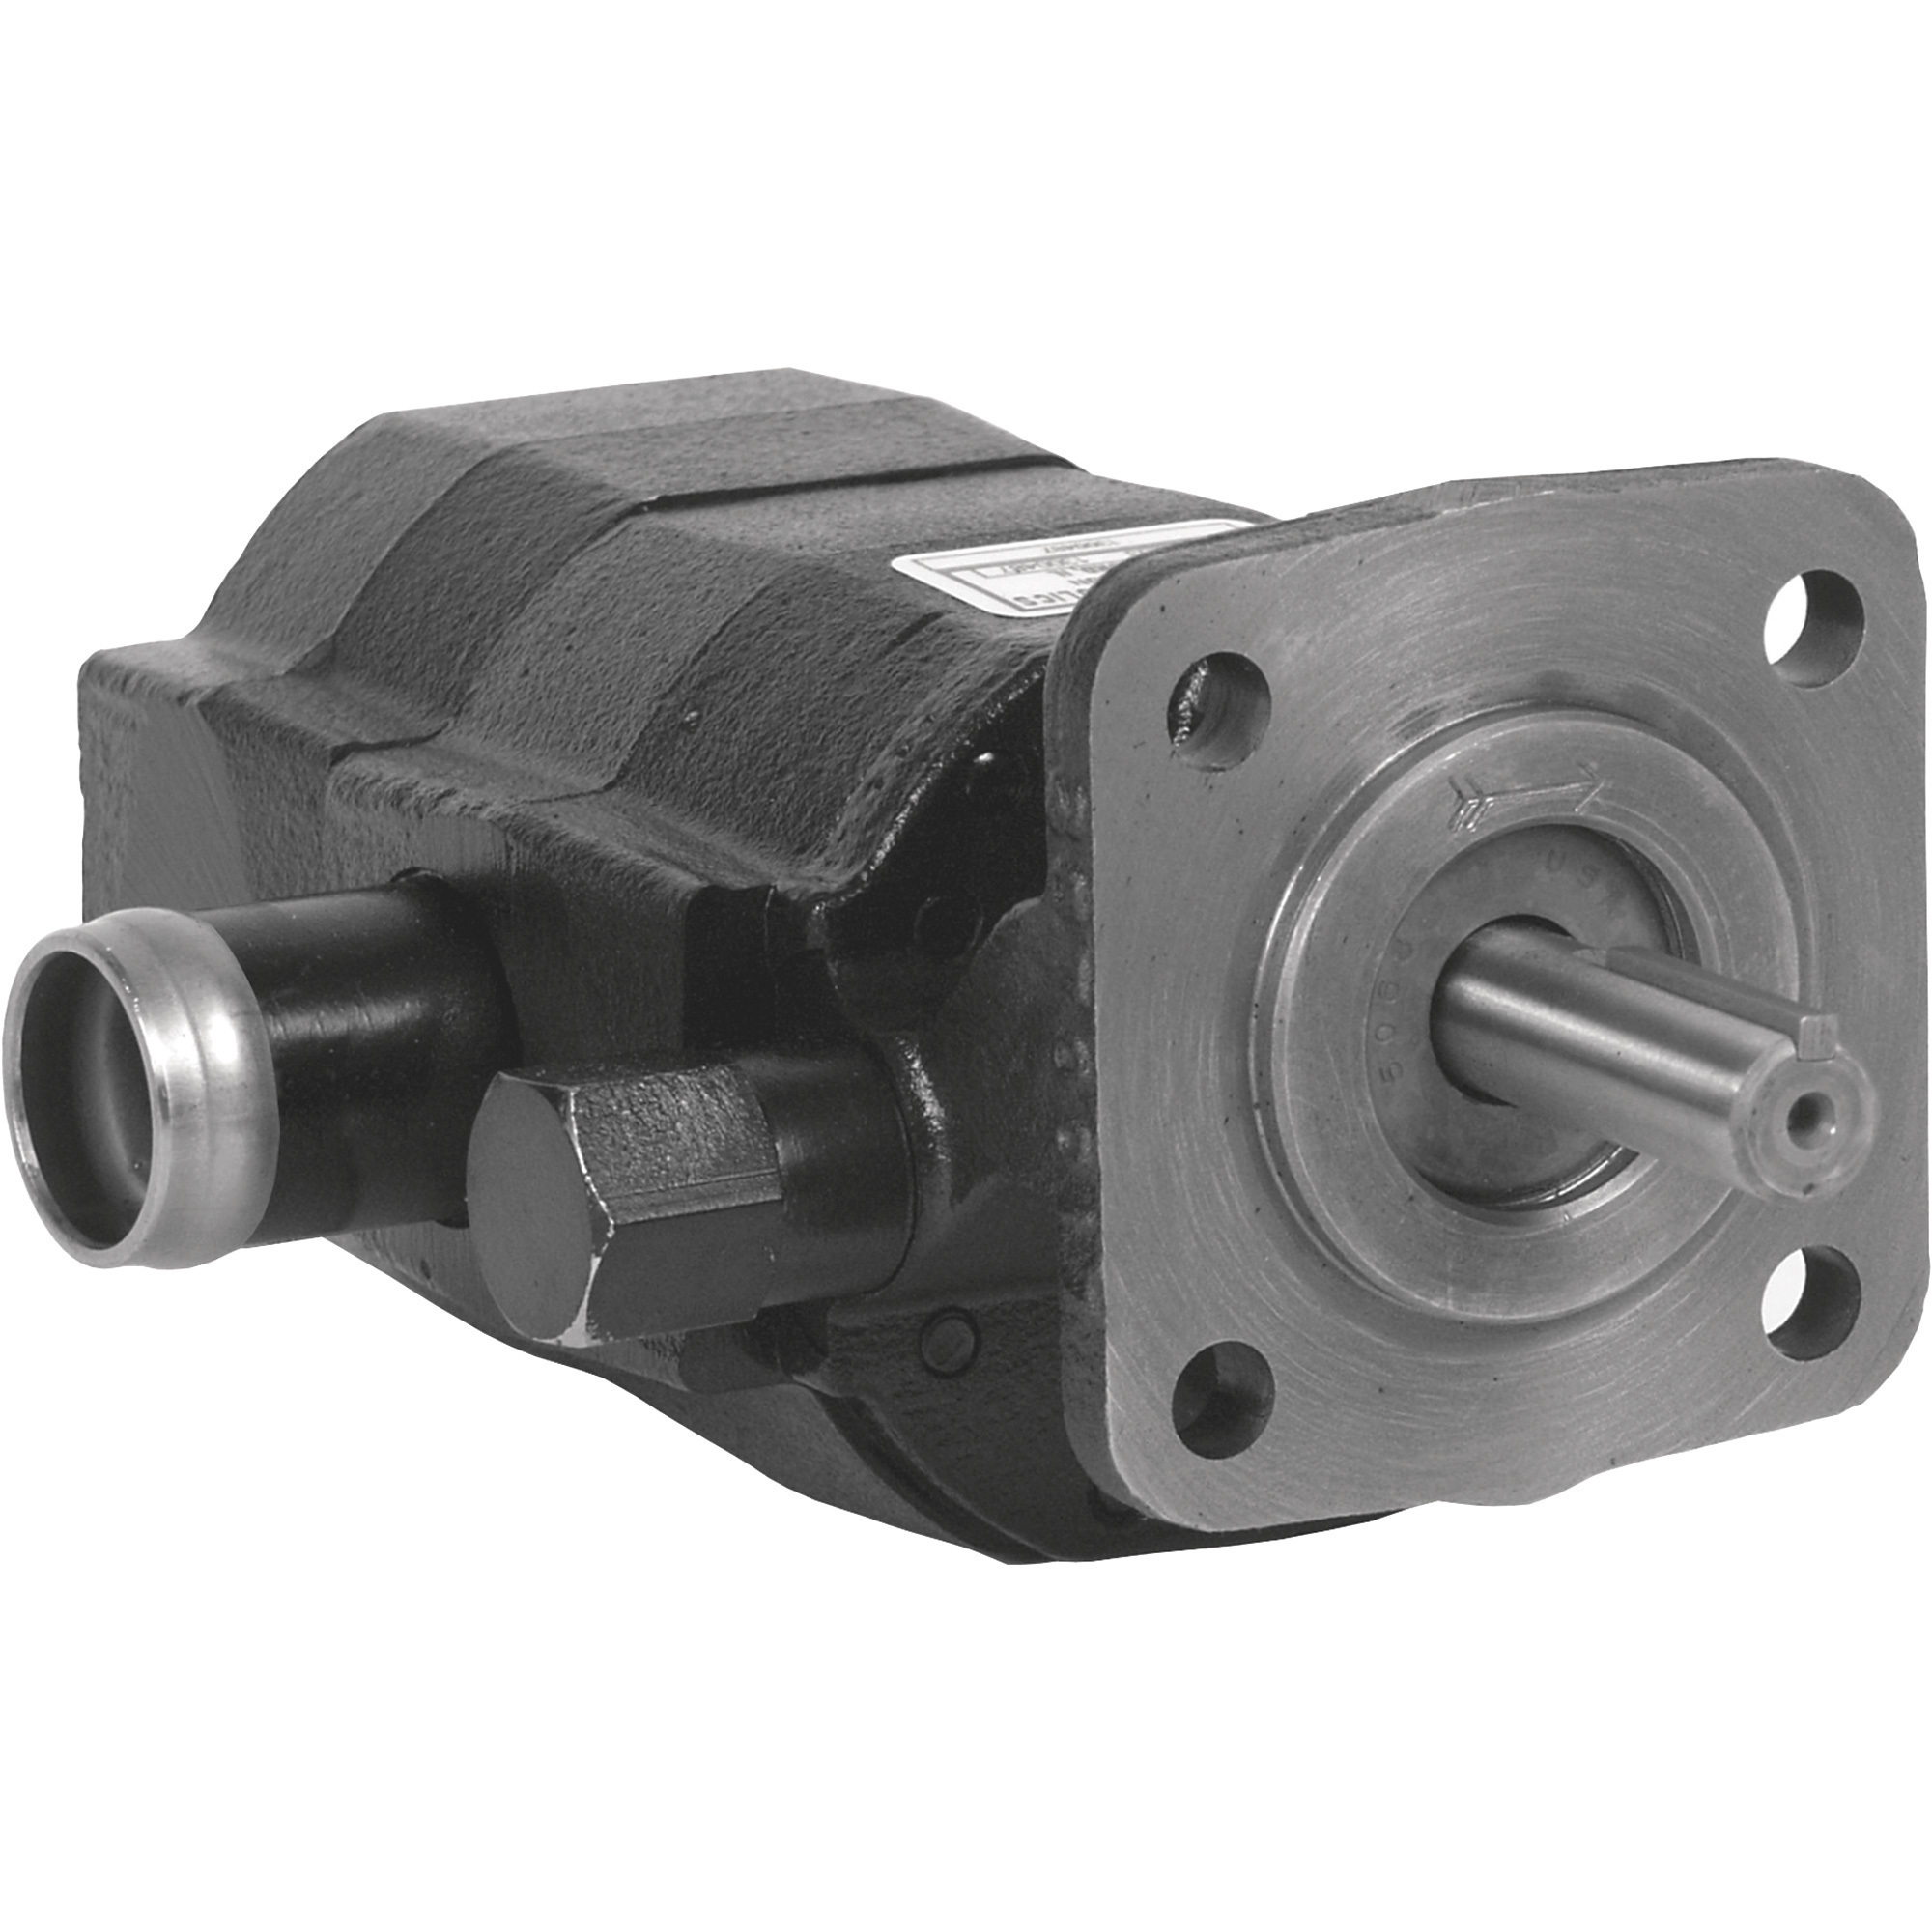 Concentric Replacement Hydraulic Pump for MTD Log Splitters, Replaces Part# 718-04127, Model 40869